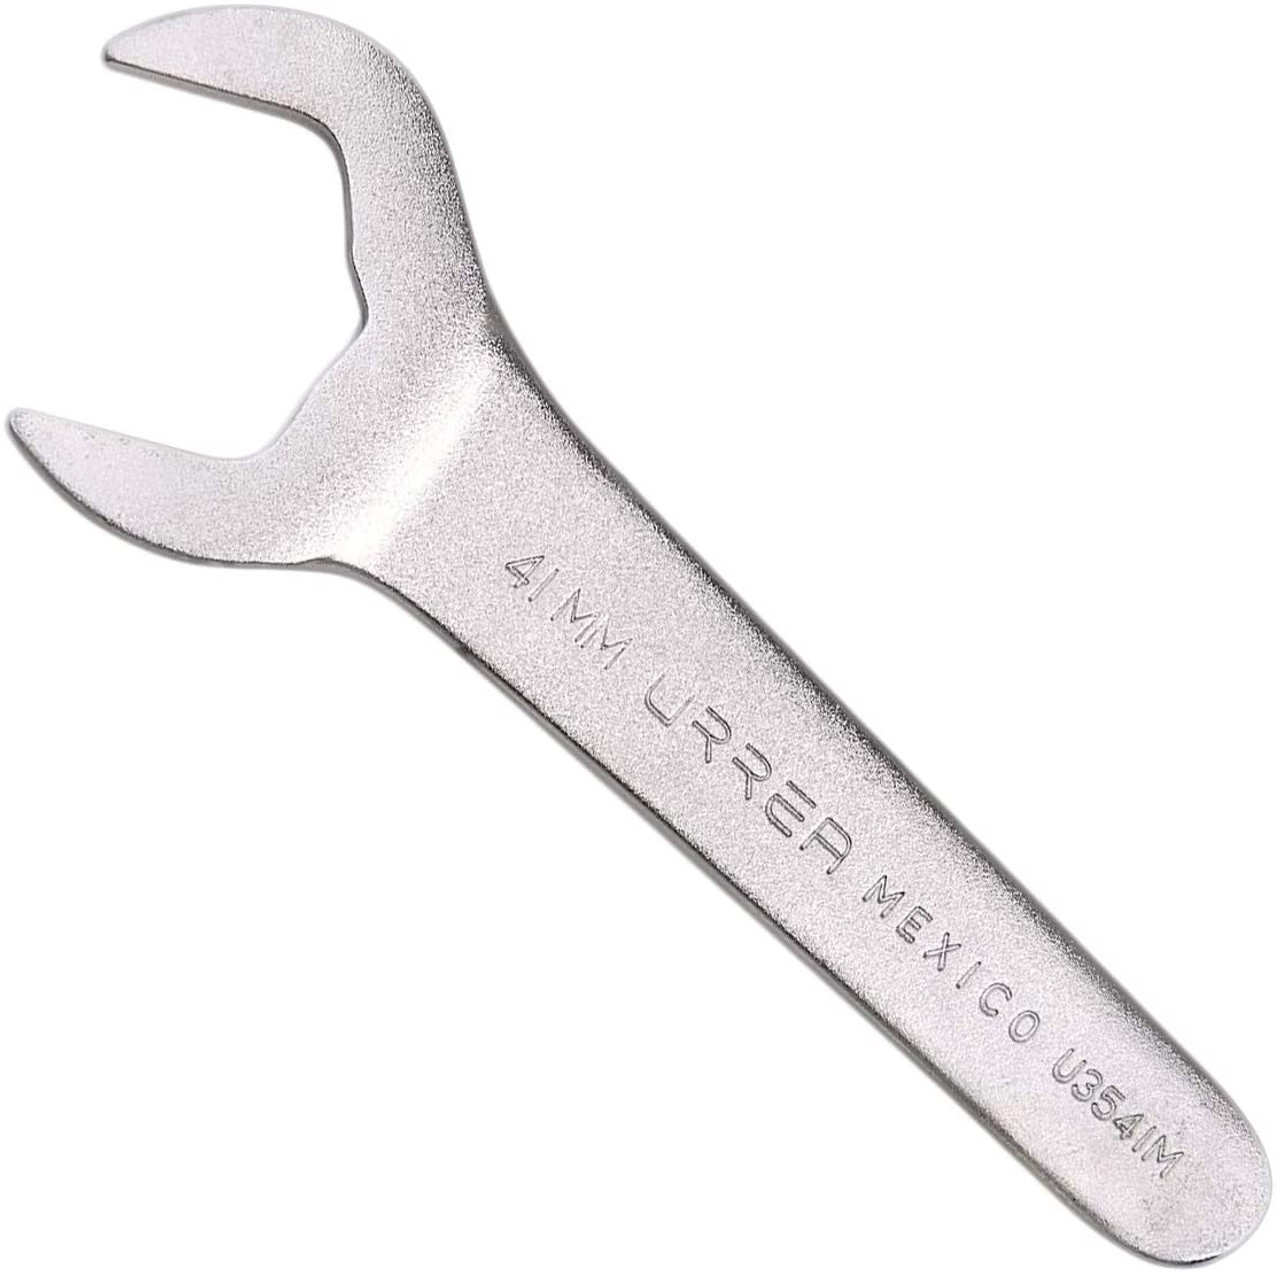 Satin Finish Service wrench, Size: 2-1/8, Total Length: 8-1/2"